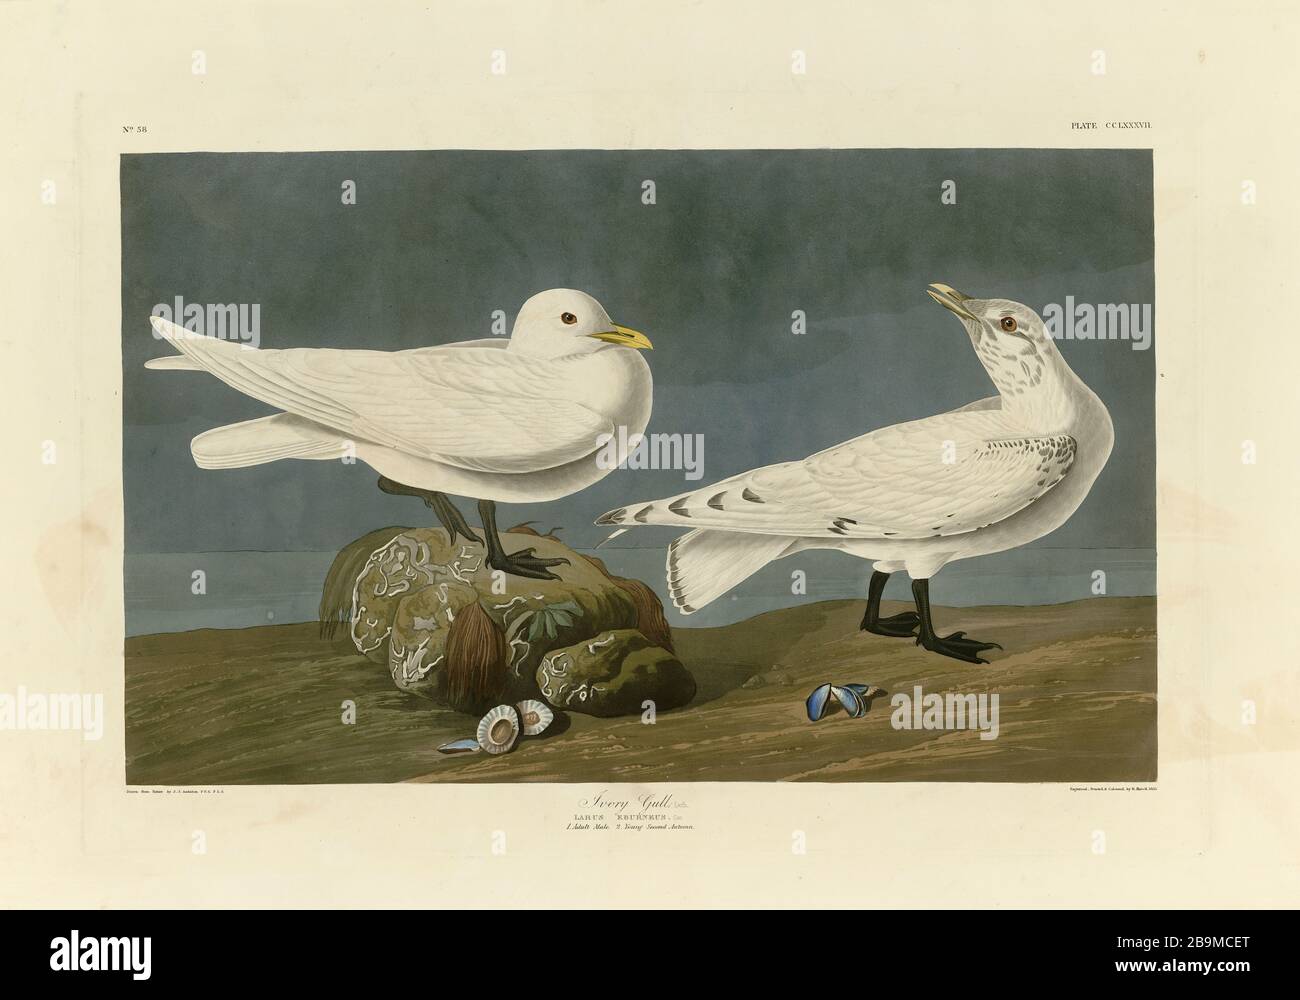 Plate 287 Ivory Gull from The Birds of America folio (1827–1839) by John James Audubon - Very high resolution and quality edited image Stock Photo